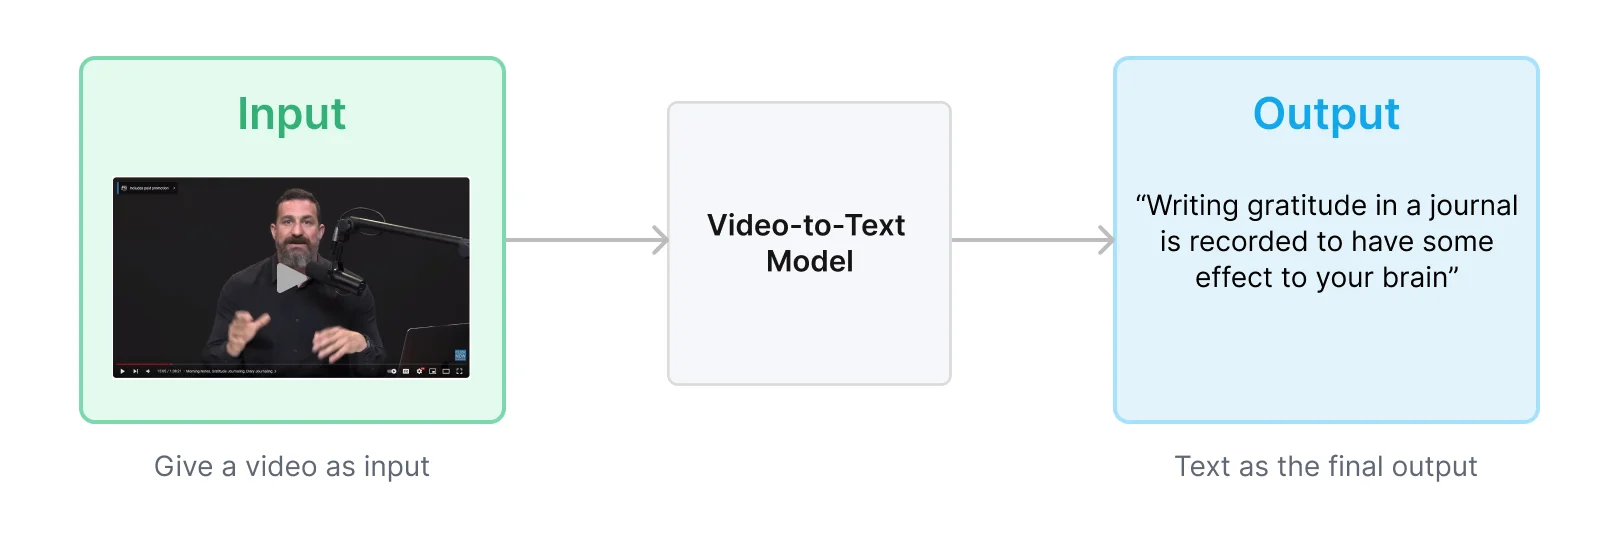 video-to-text model